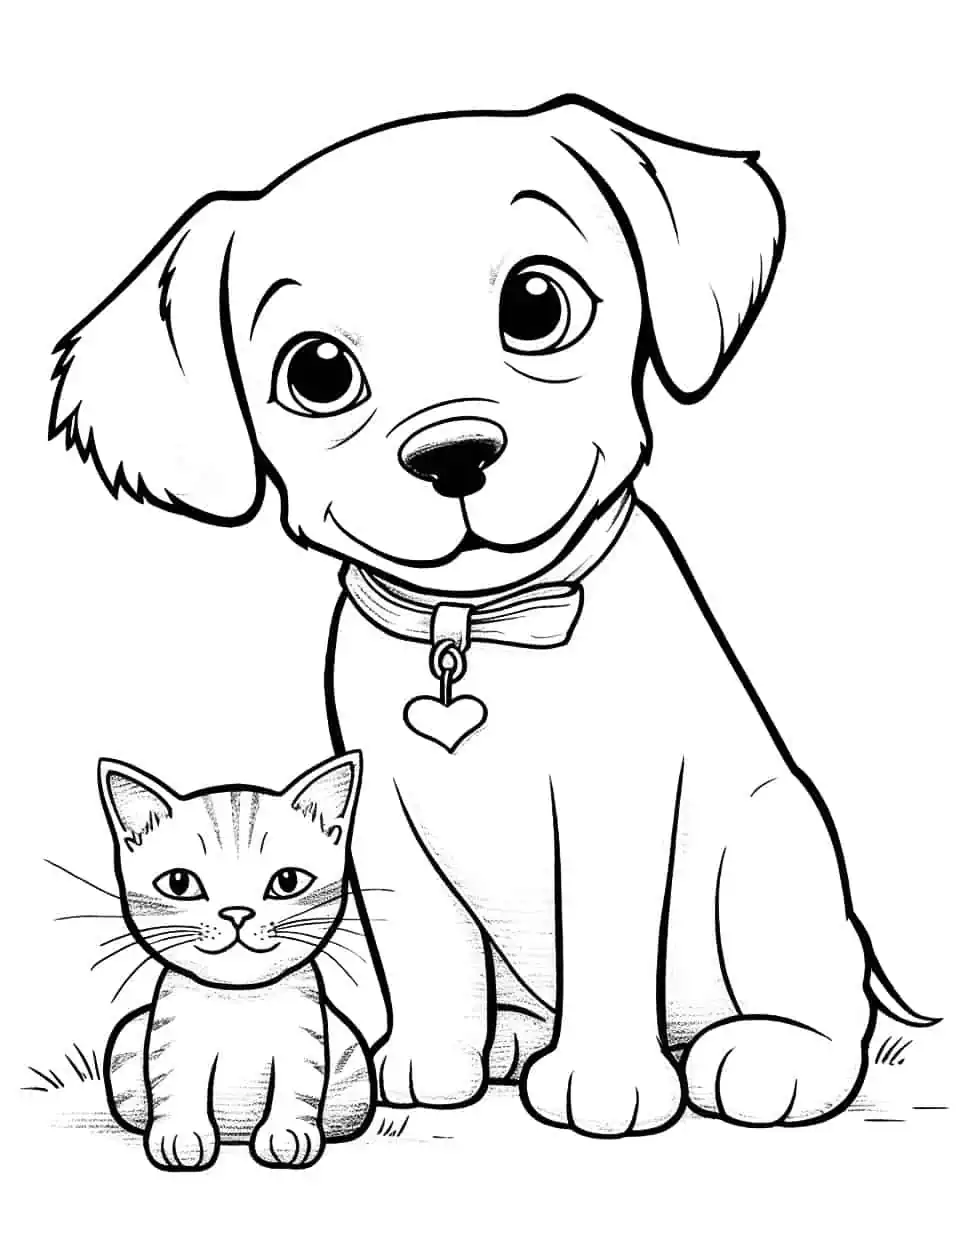 Animal Friends Coloring Page - A puppy and a kitten becoming best friends.